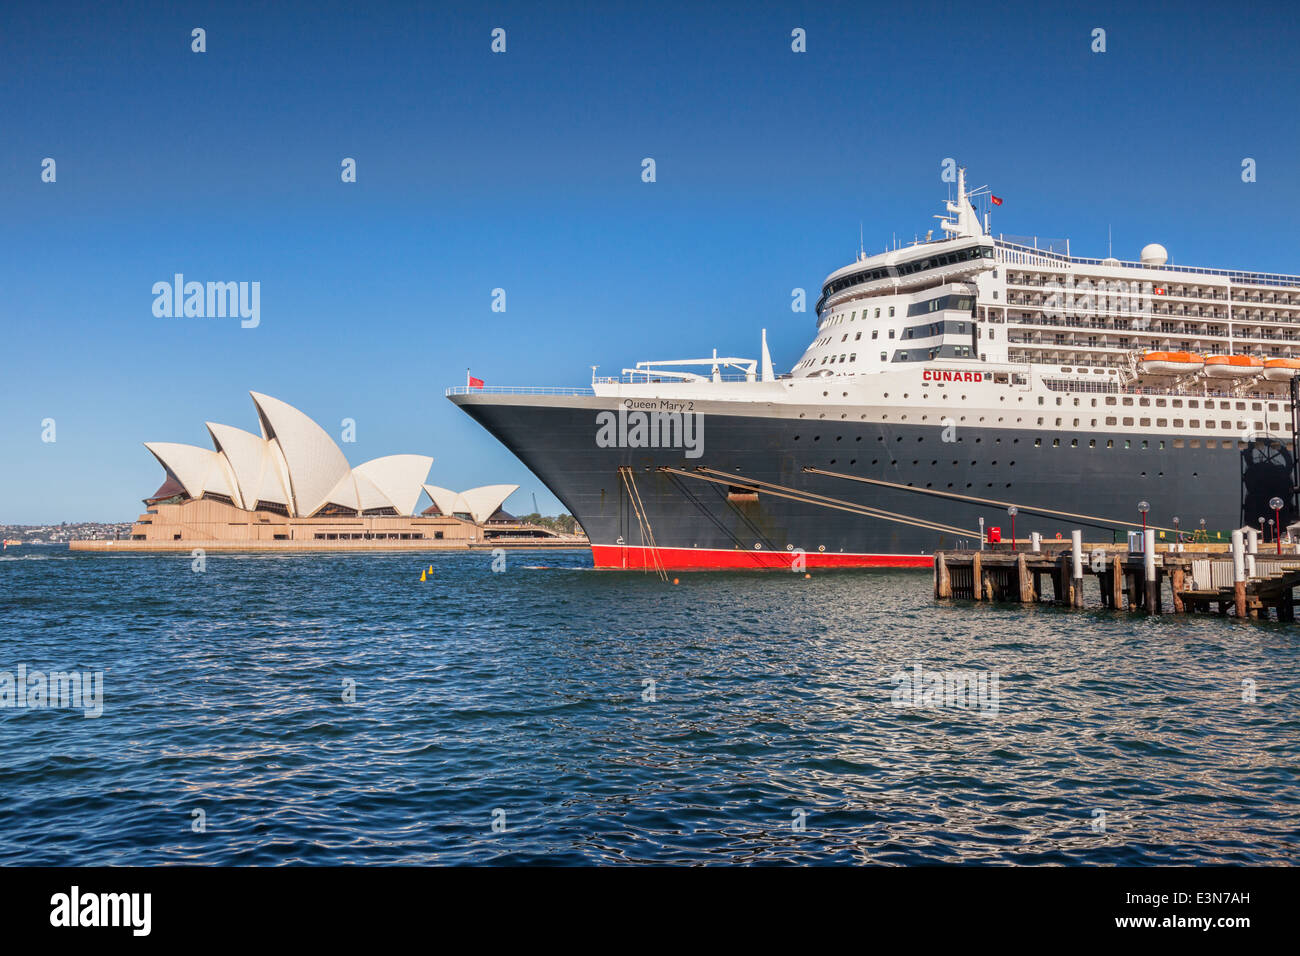 Cunard liner Queen Mary 2 berthed at Circular Quay, Sydney, with Sydney Opera House in the background. Stock Photo